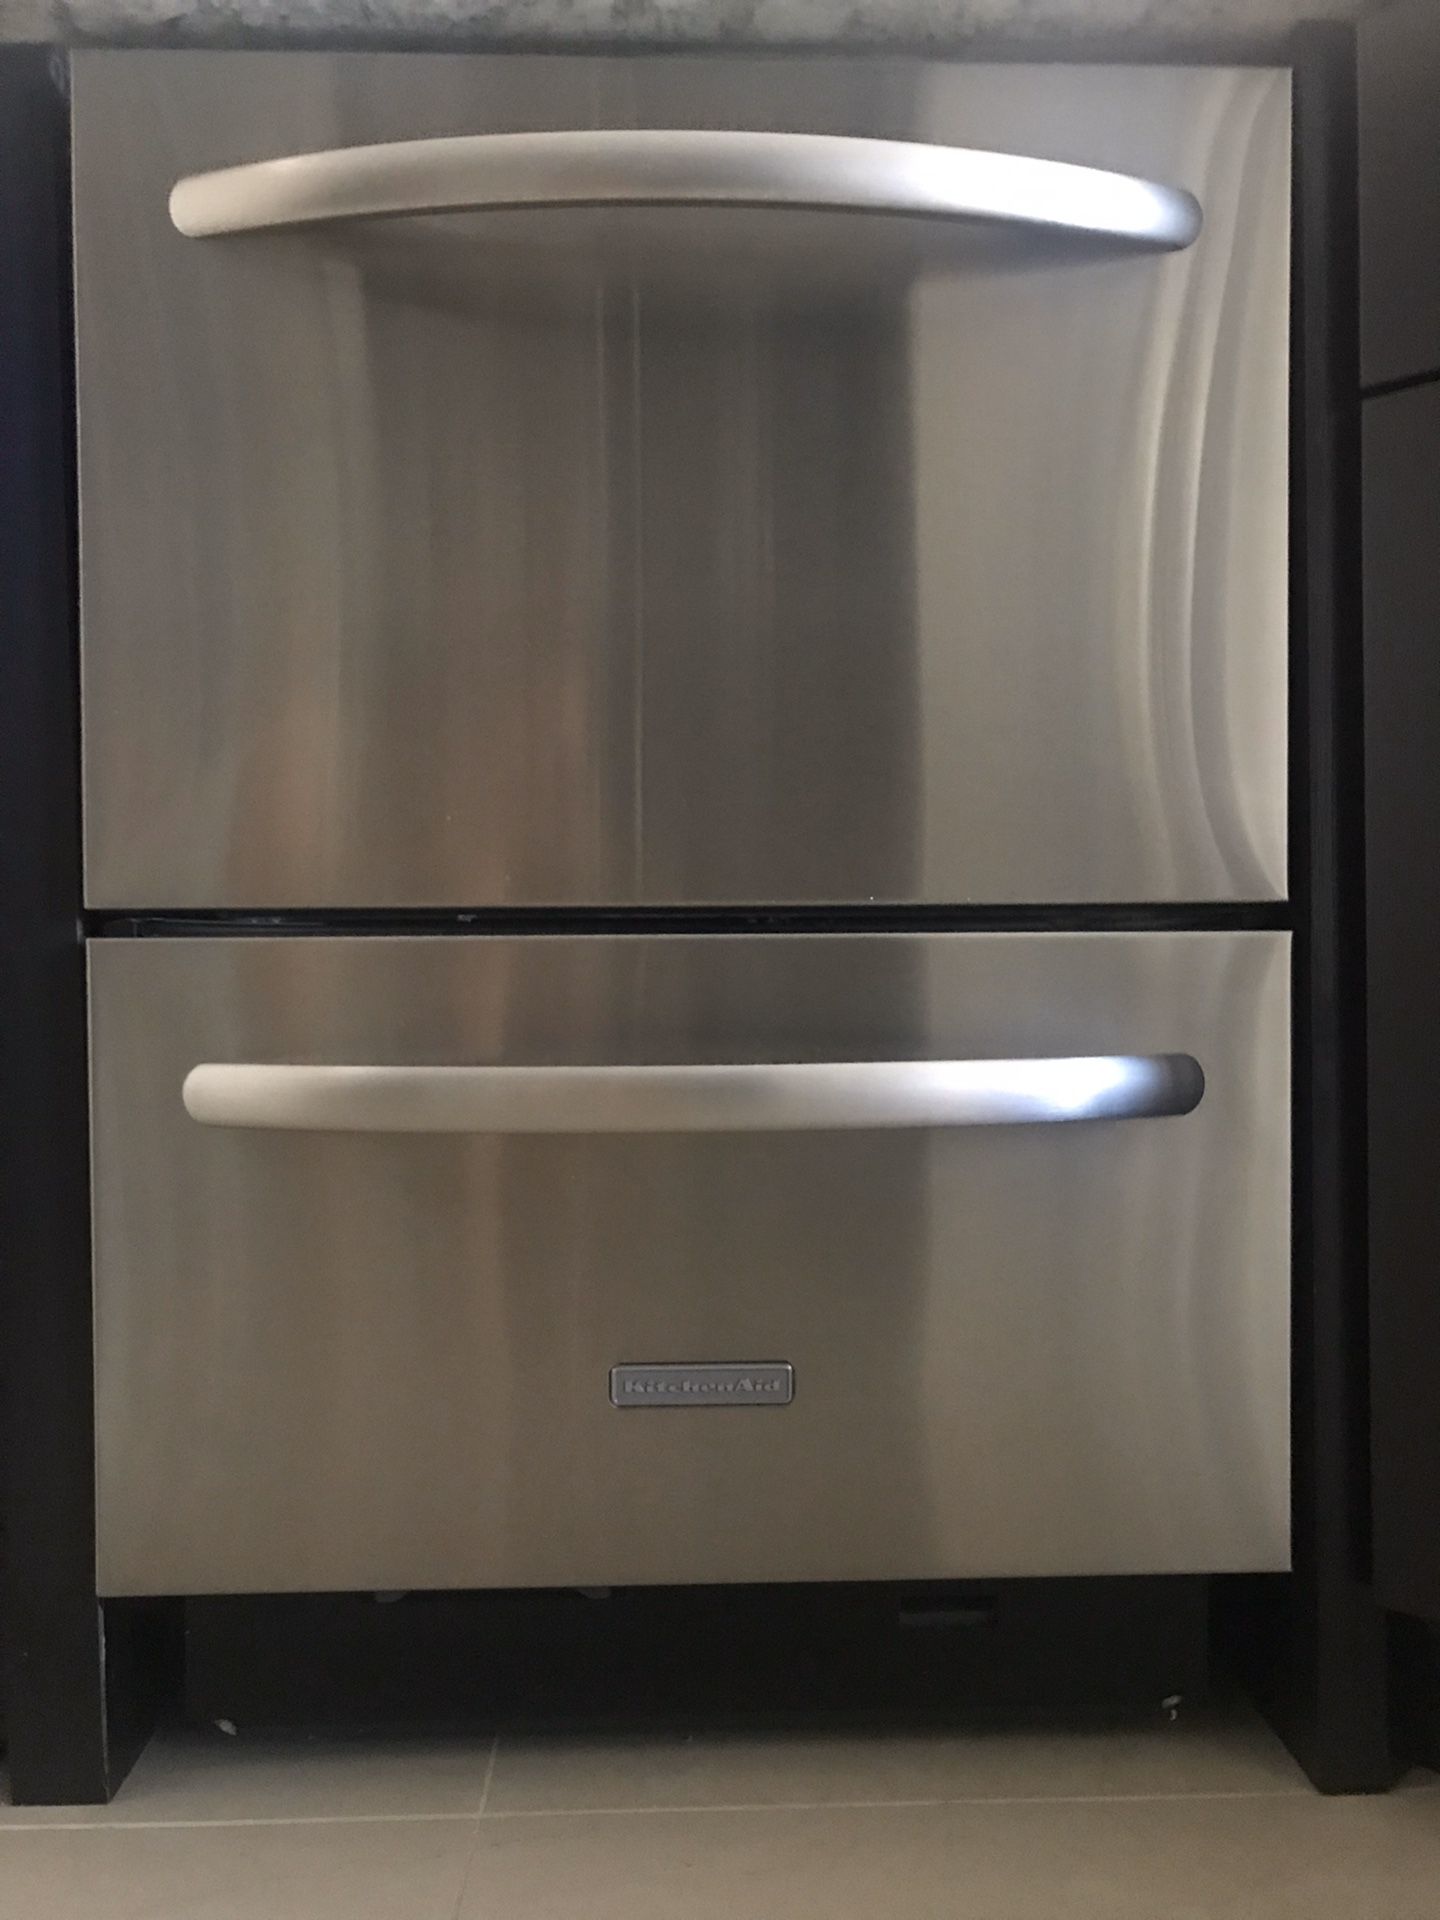 KITCHEN AID (Dishwasher - Top Controls Double Drawer)